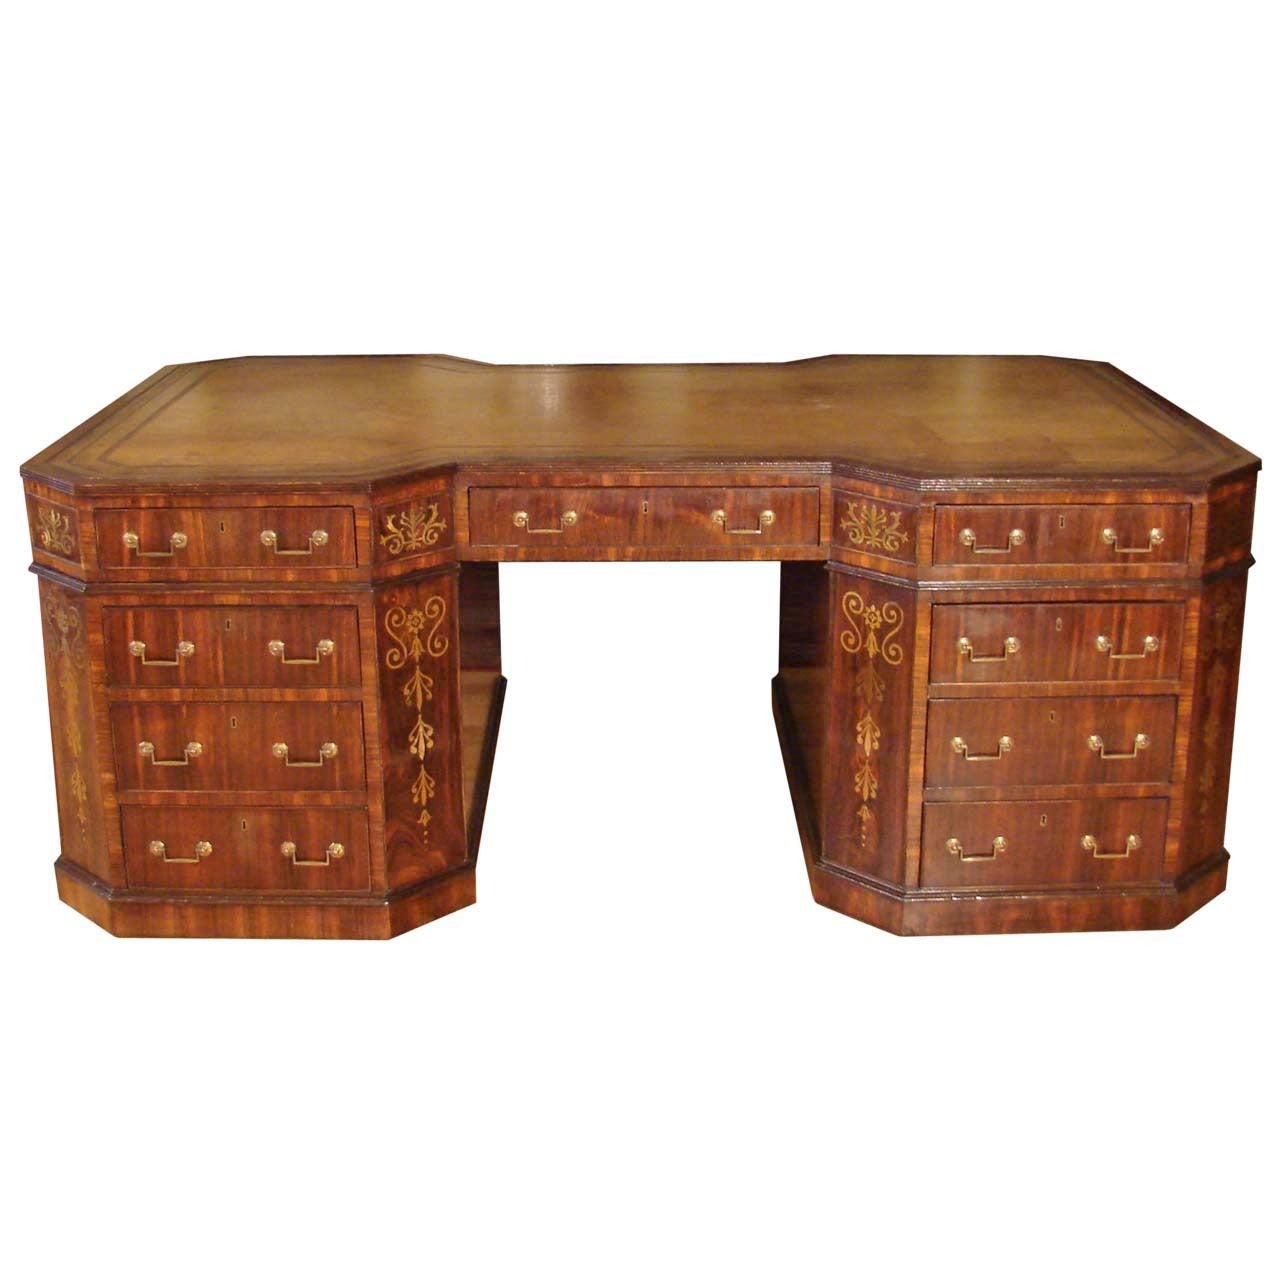 Important Large English Rosewood Brass Inlaid Partners Desk